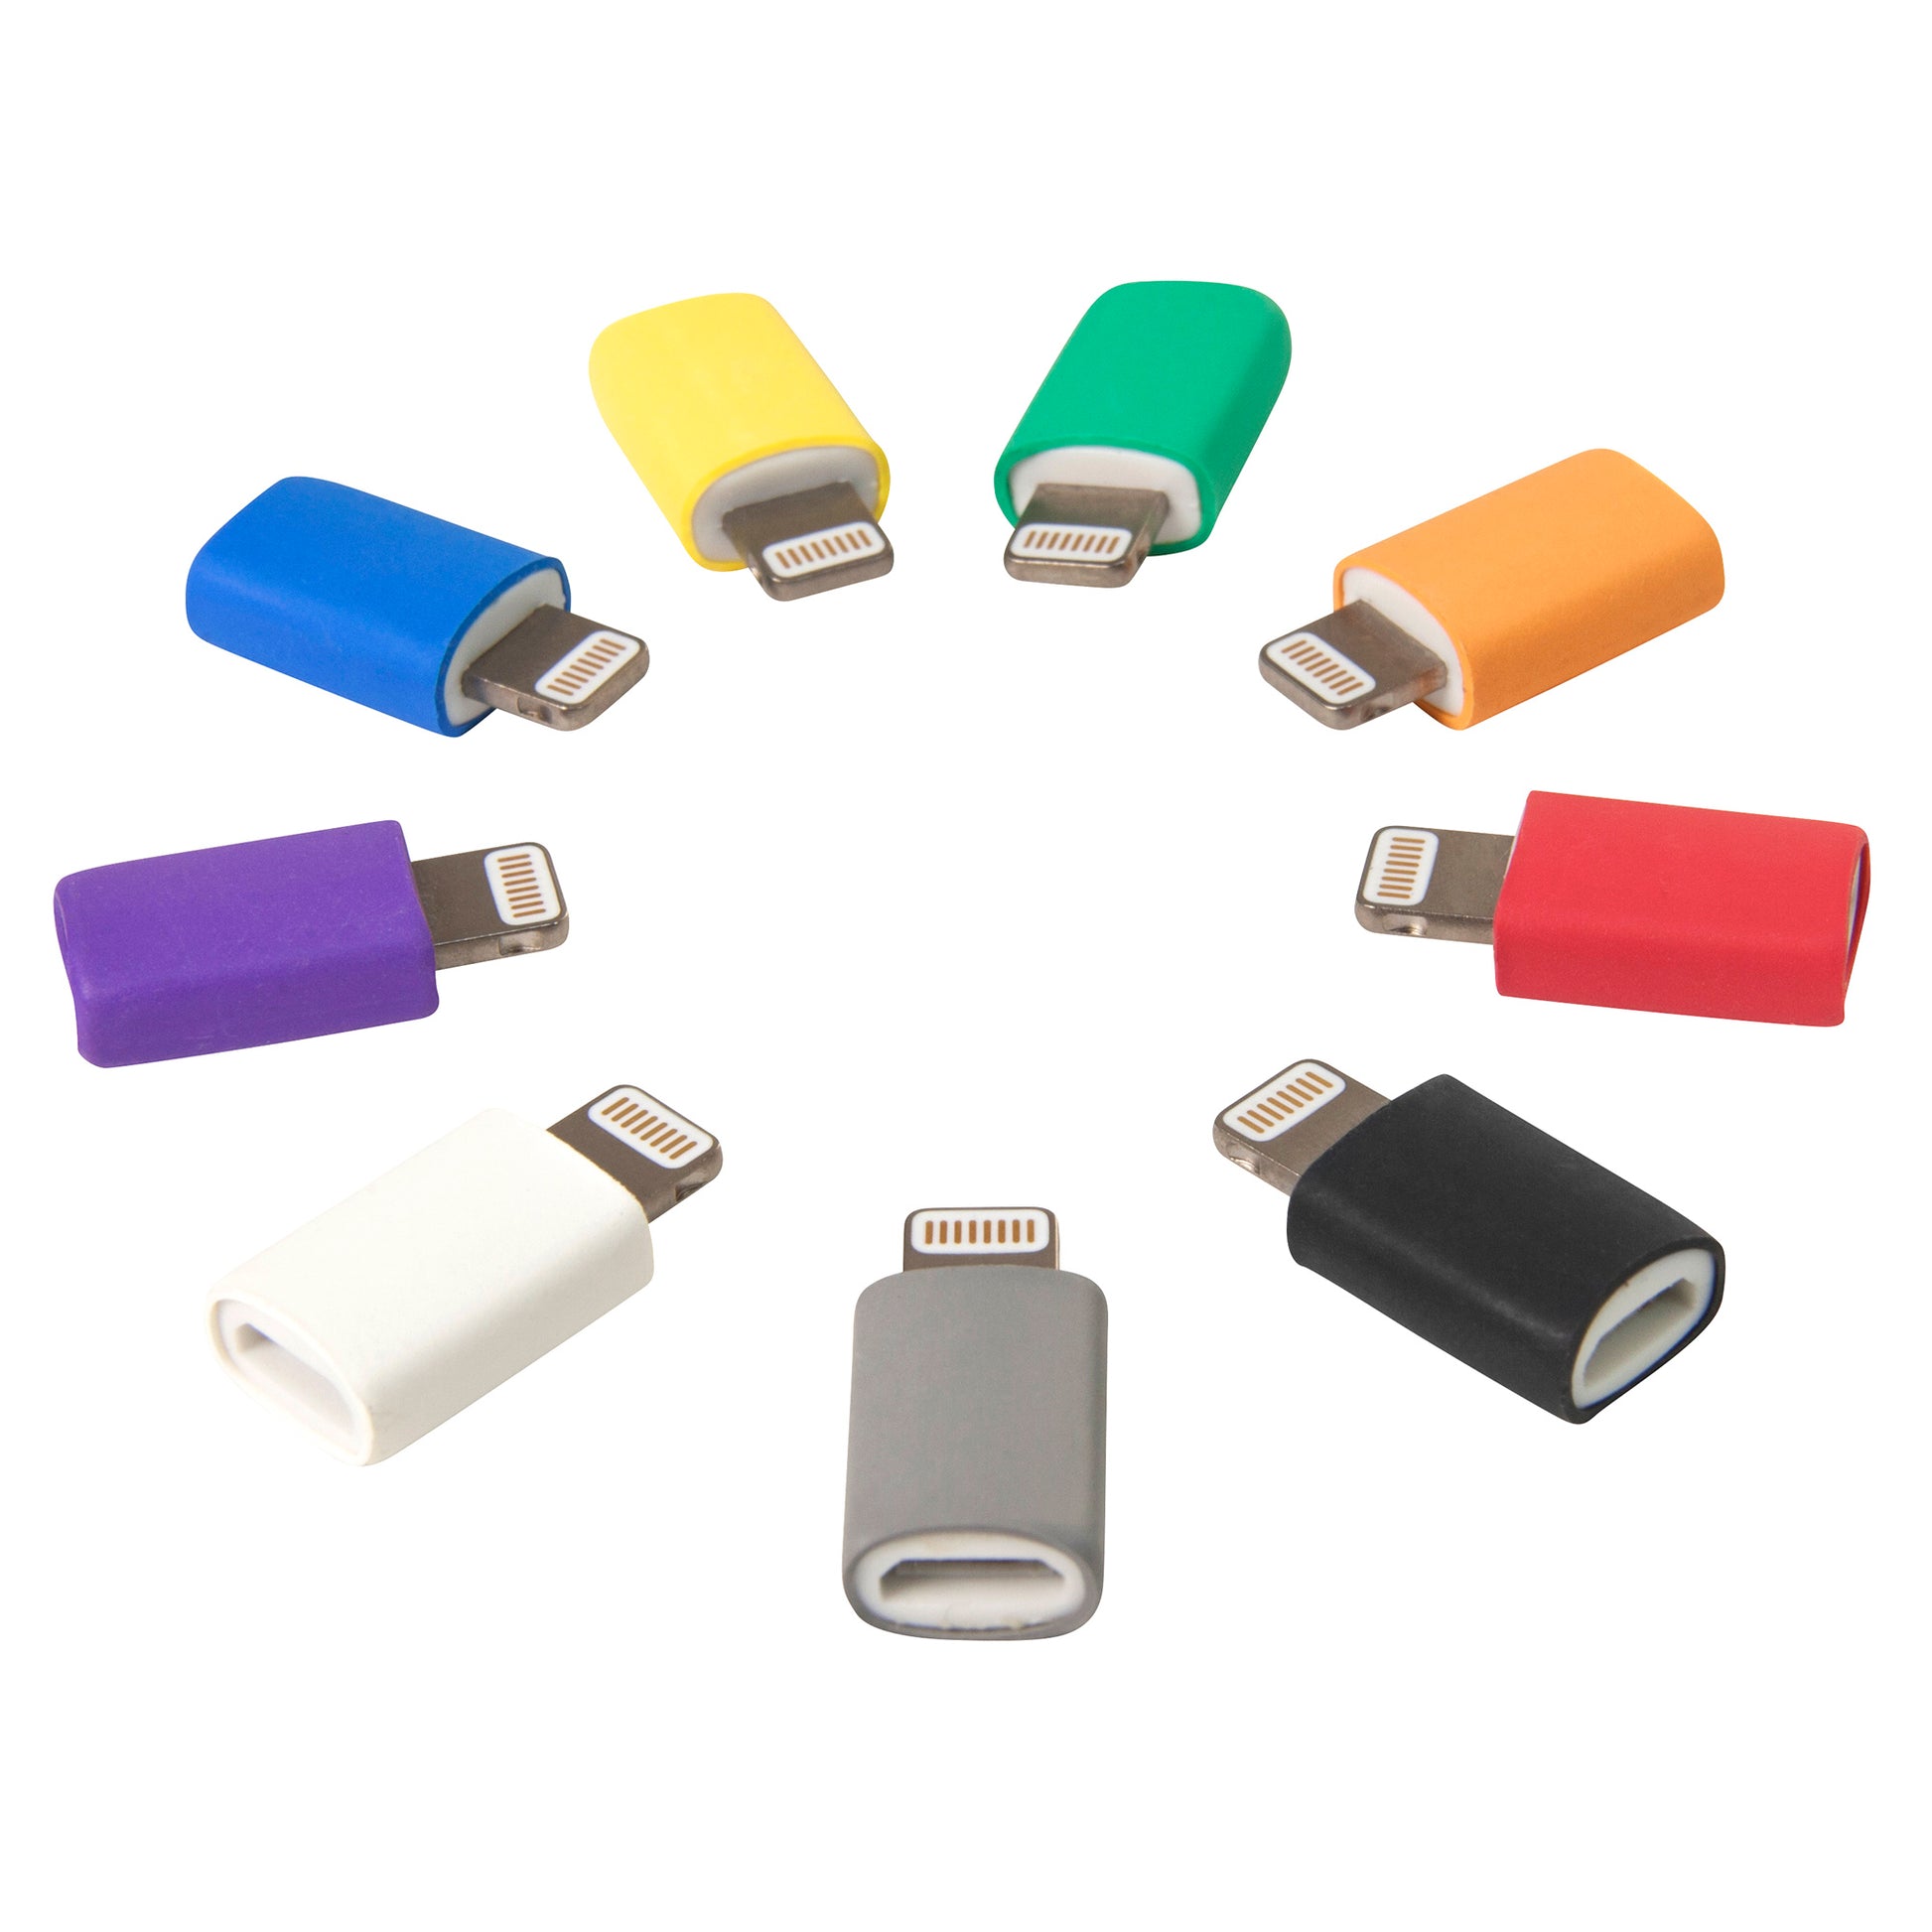 Micro USB Adapter Lightning | spare parts for charging cables | recable -  recable.eu - the fair and sustainable USB cable made in Germany